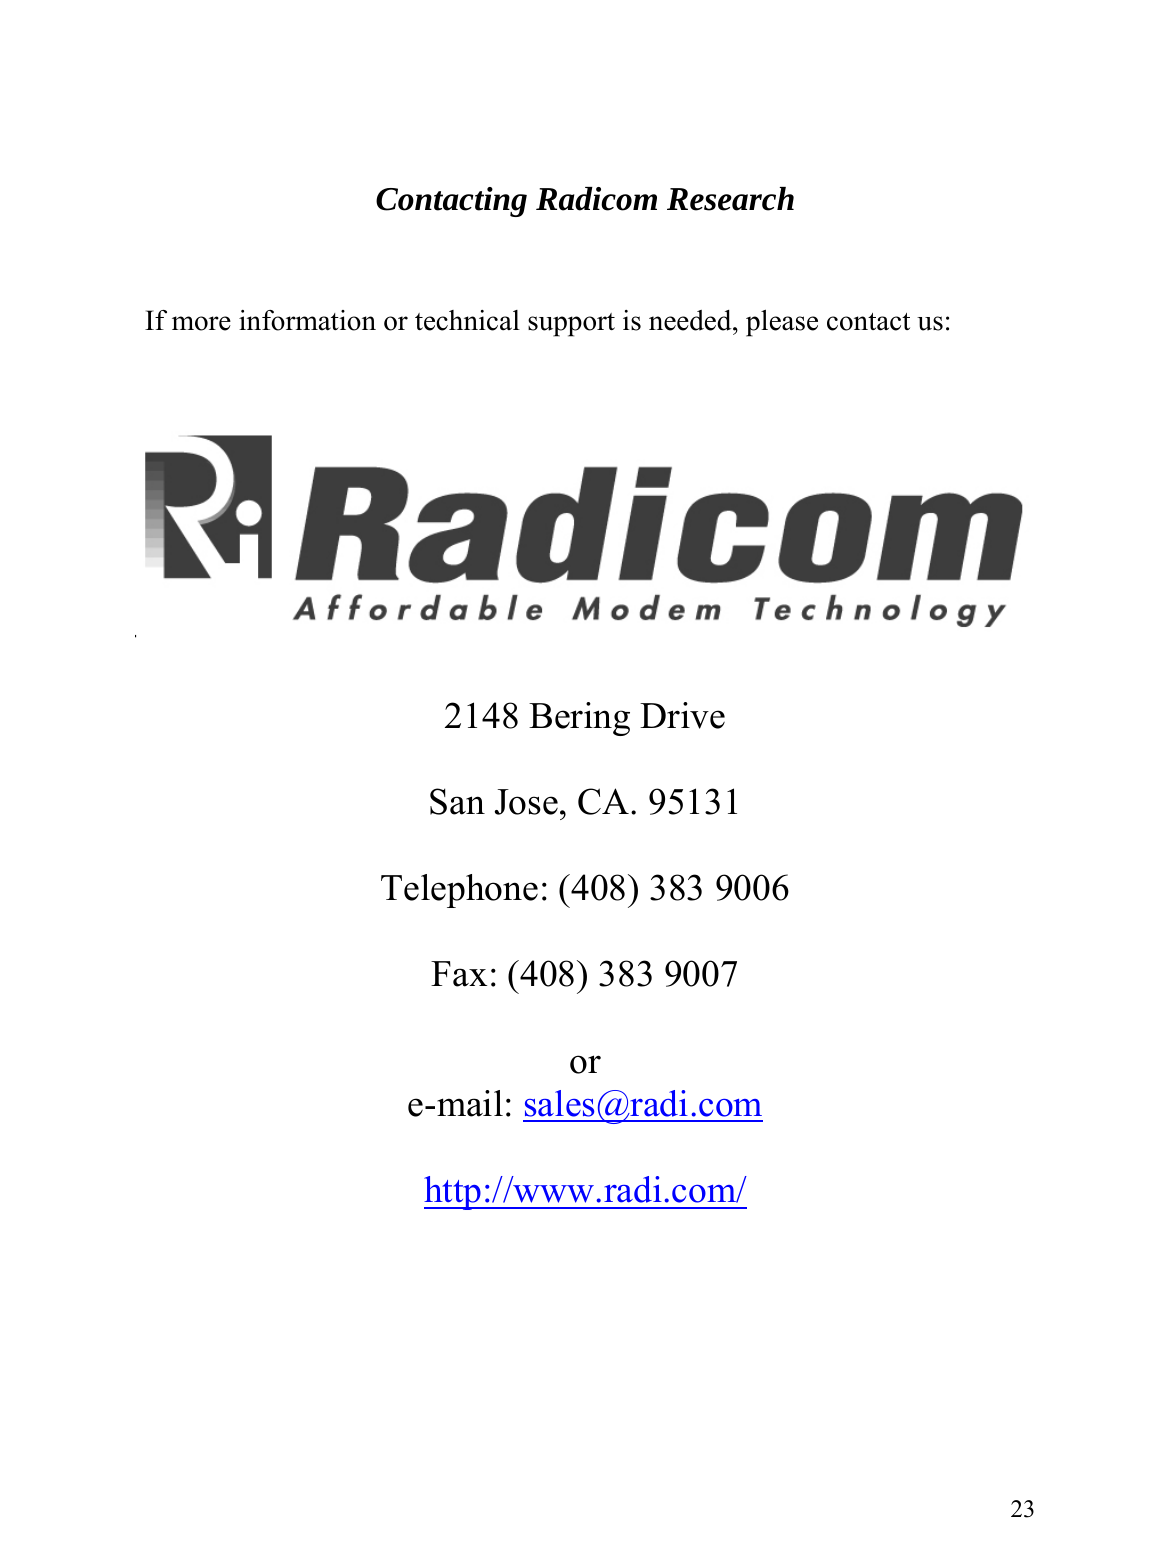     earch     Contacting Radicom Res    If more information or technical support is needed, please contact us:   2148 Bering Drive   San Jose, CA. 95131 Telephone: (408) 383 9006  Fax: (408) 383 9007  or e-mail: sales@radi.com http://www.radi.com/     23 